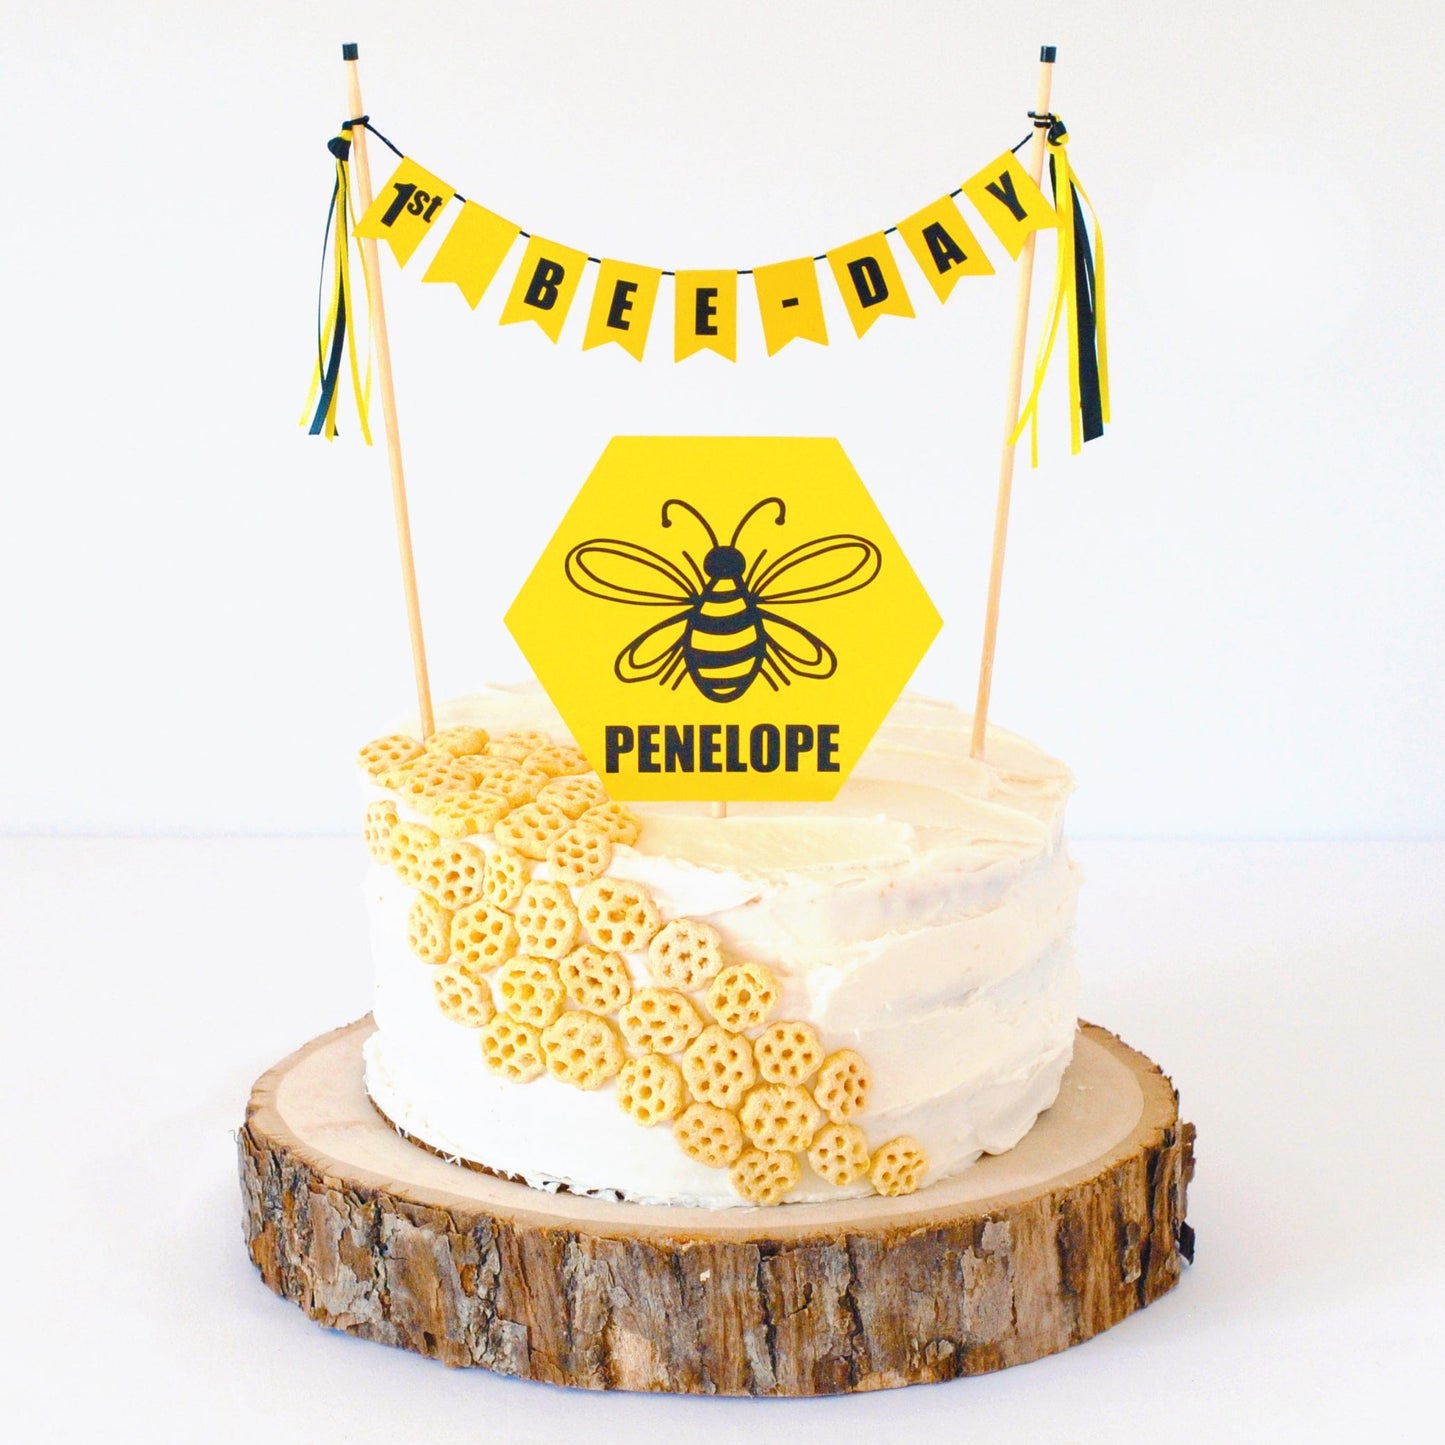 1st bee day cake banner with yellow hexagon shaped topper with a black bee image personalized with name